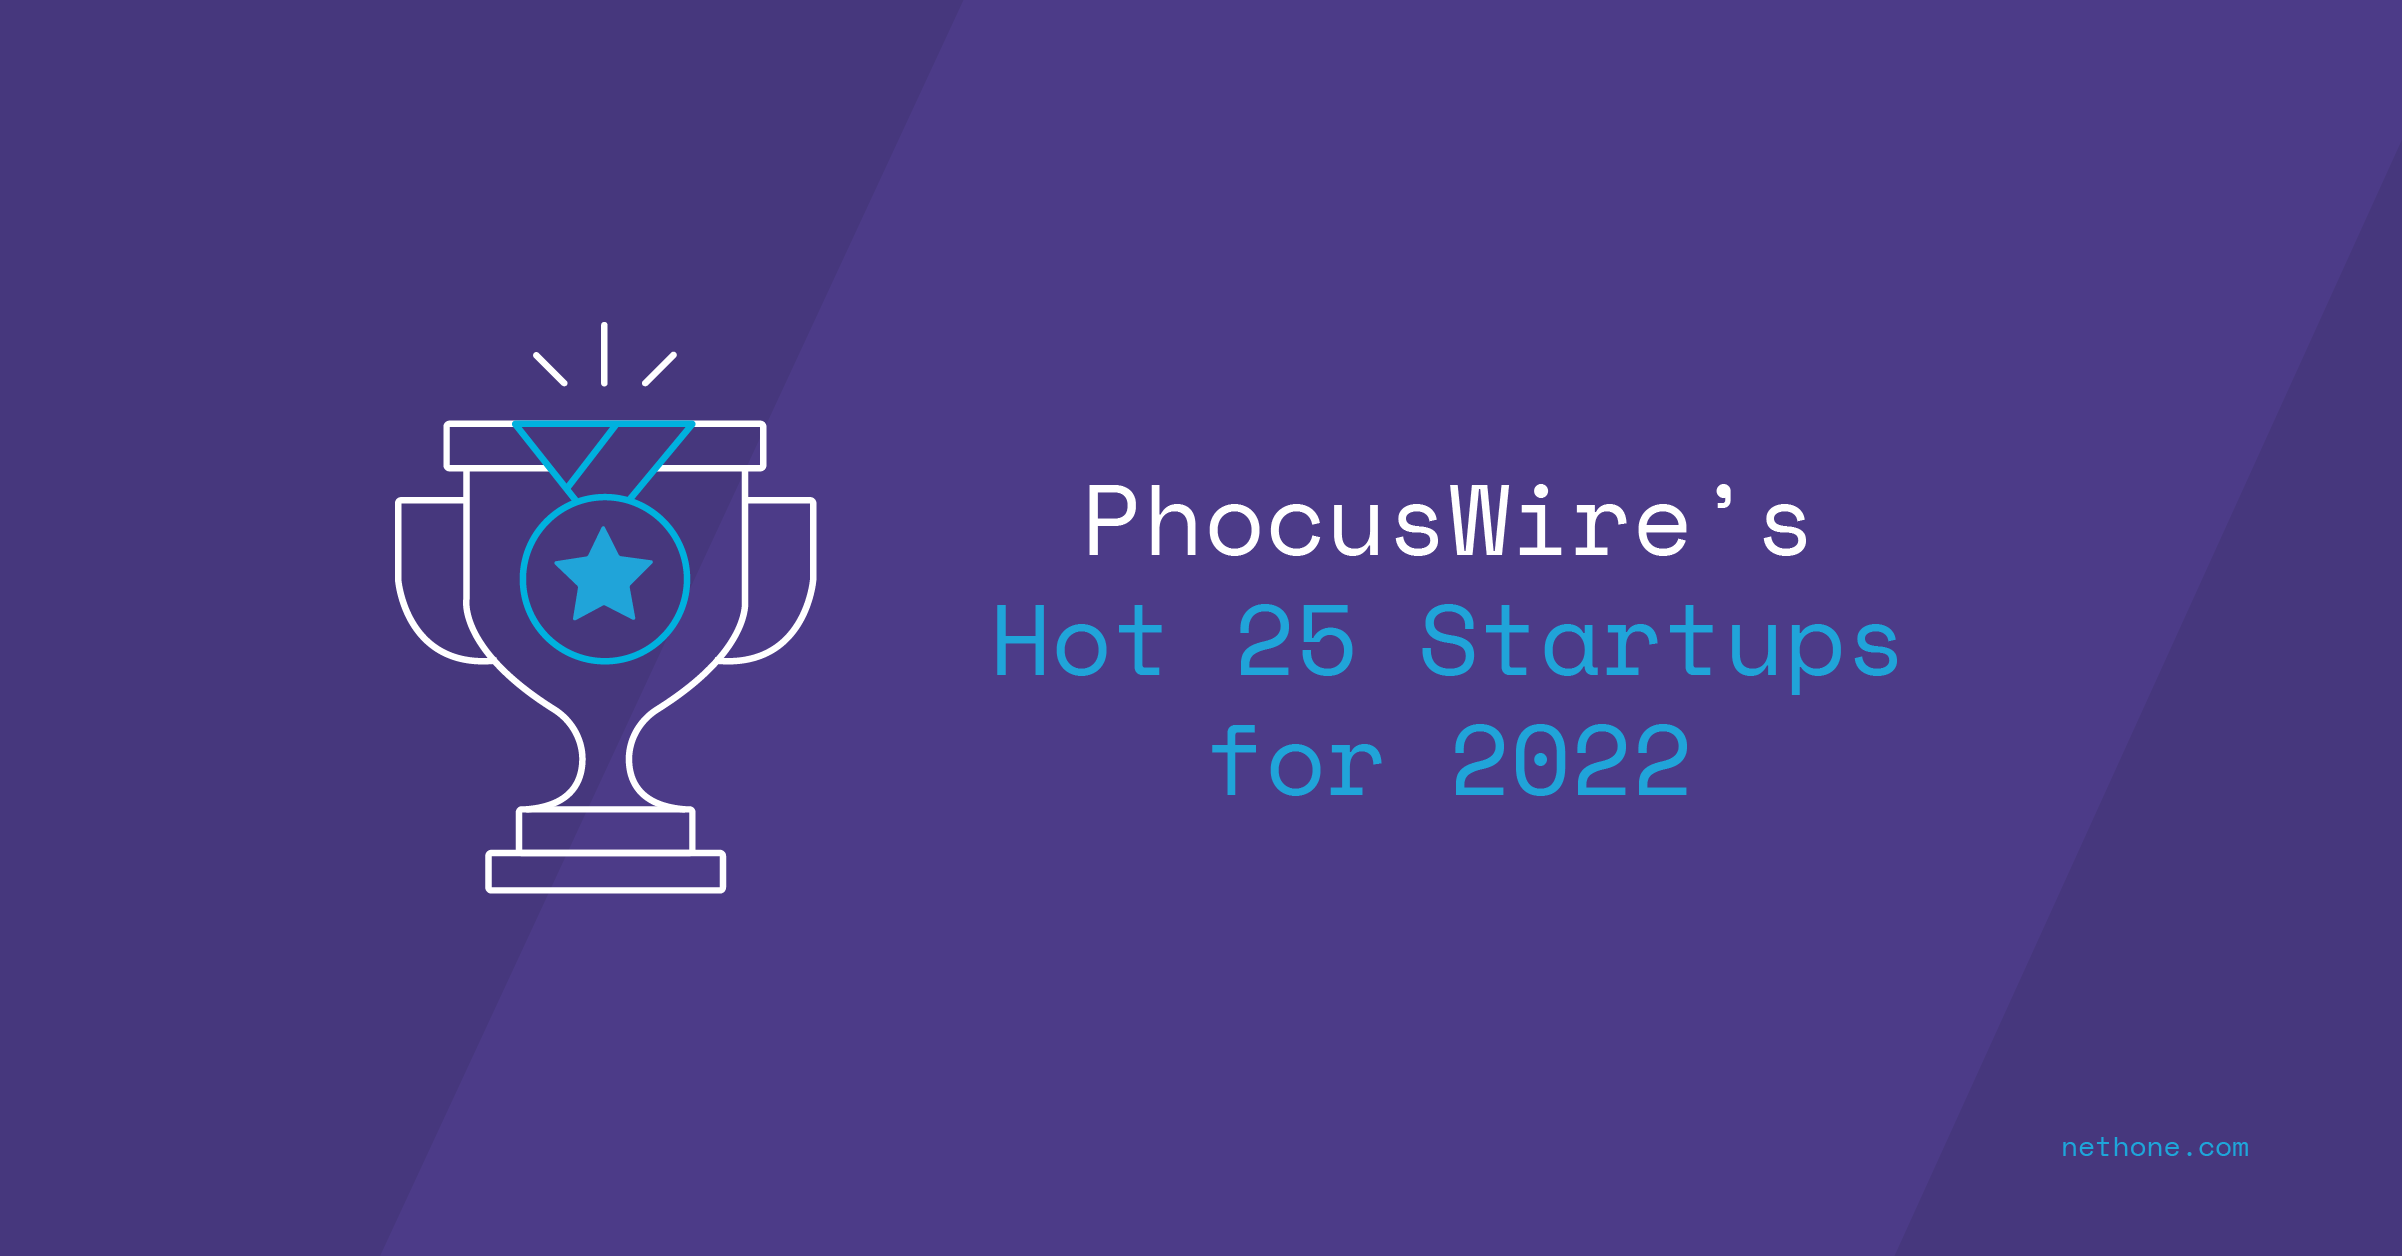 PhocusWire's HOT 25 Startups for 2022